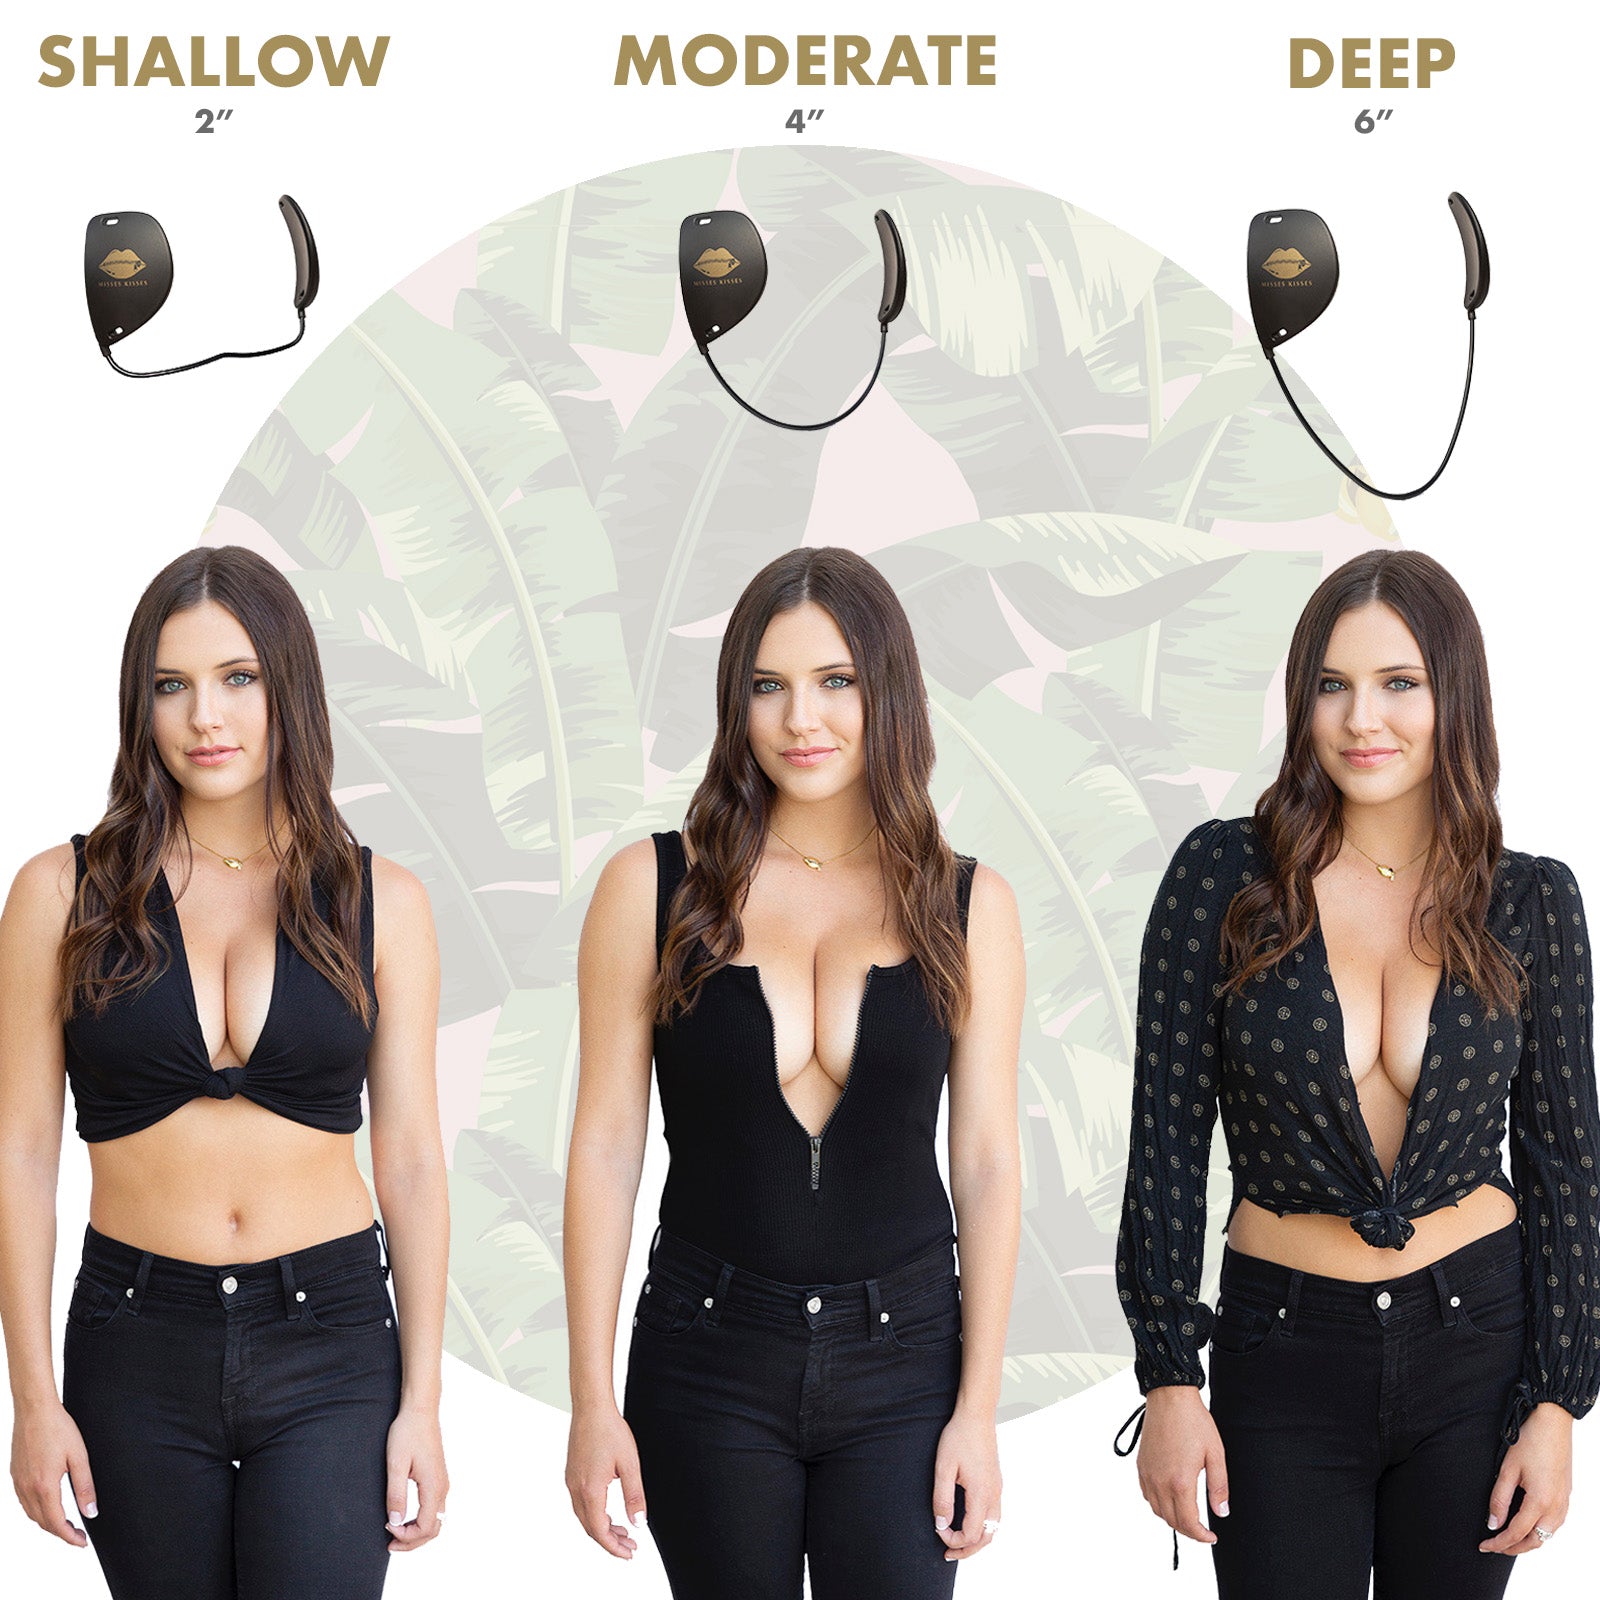 BUILD-A-BRA KIT  Achieve your dream cleavage and support with